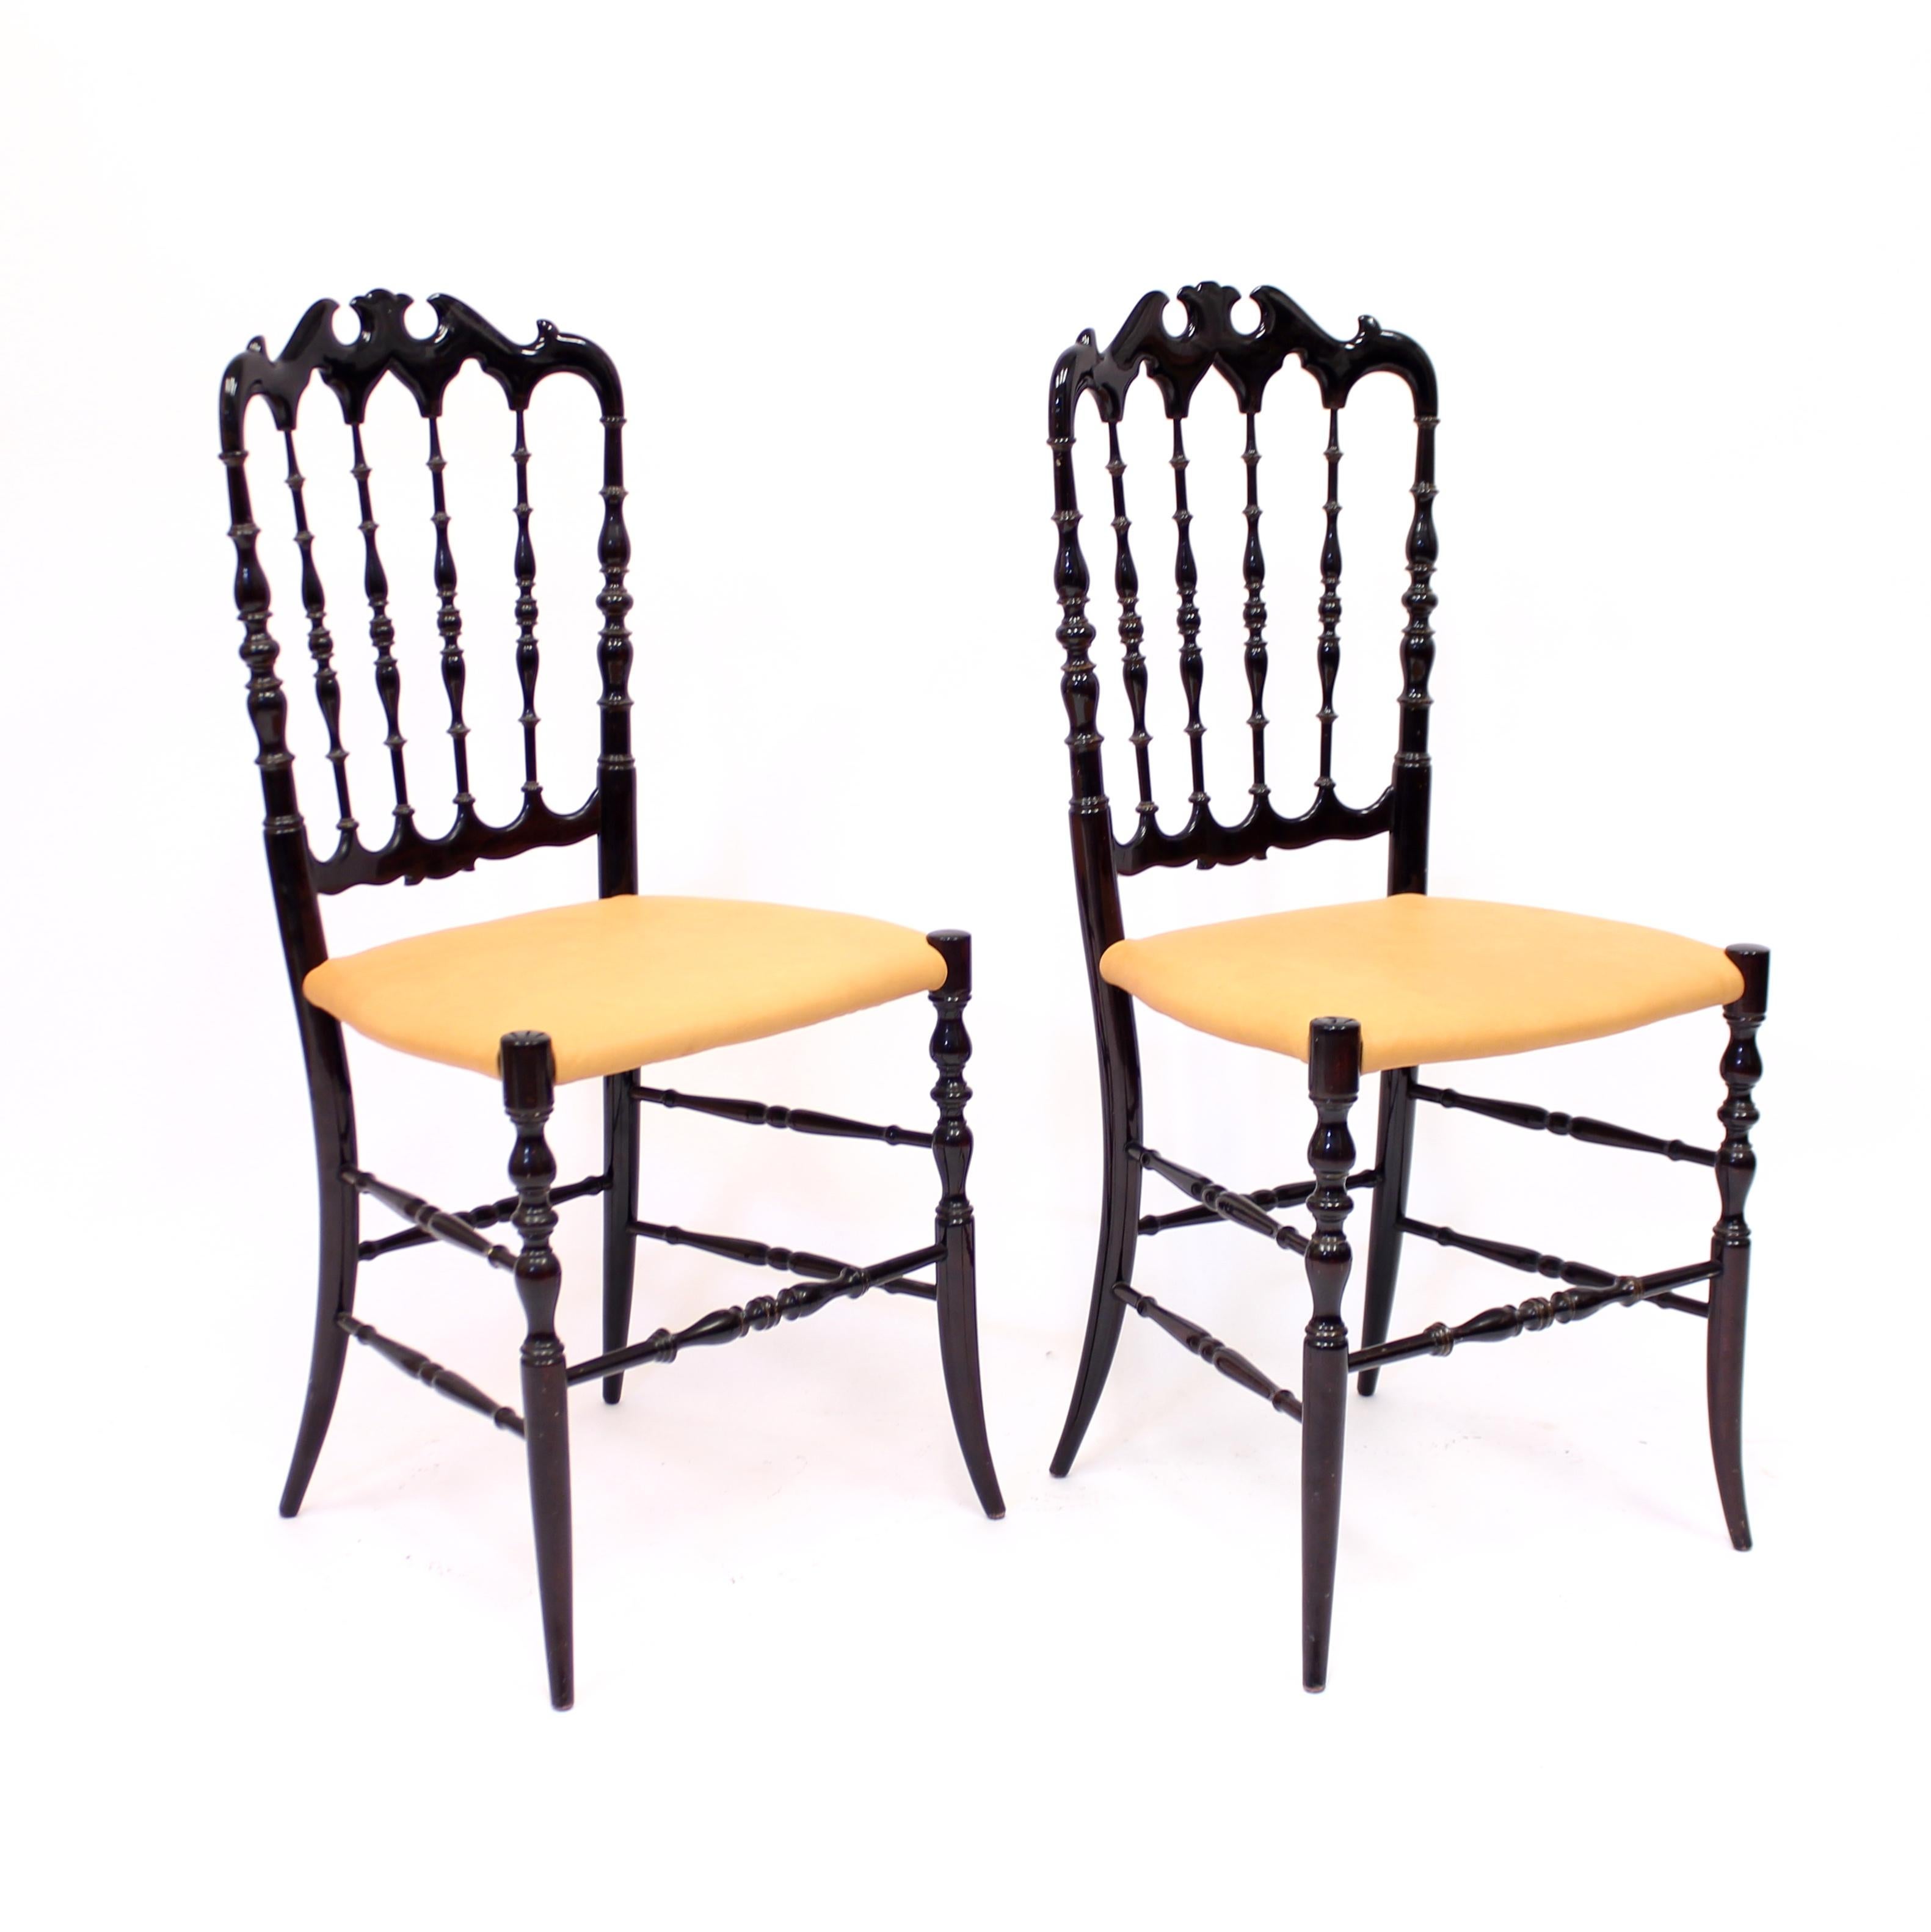 Pair of Vintage Chiavari Chairs with Leather Seats, circa 1950 1